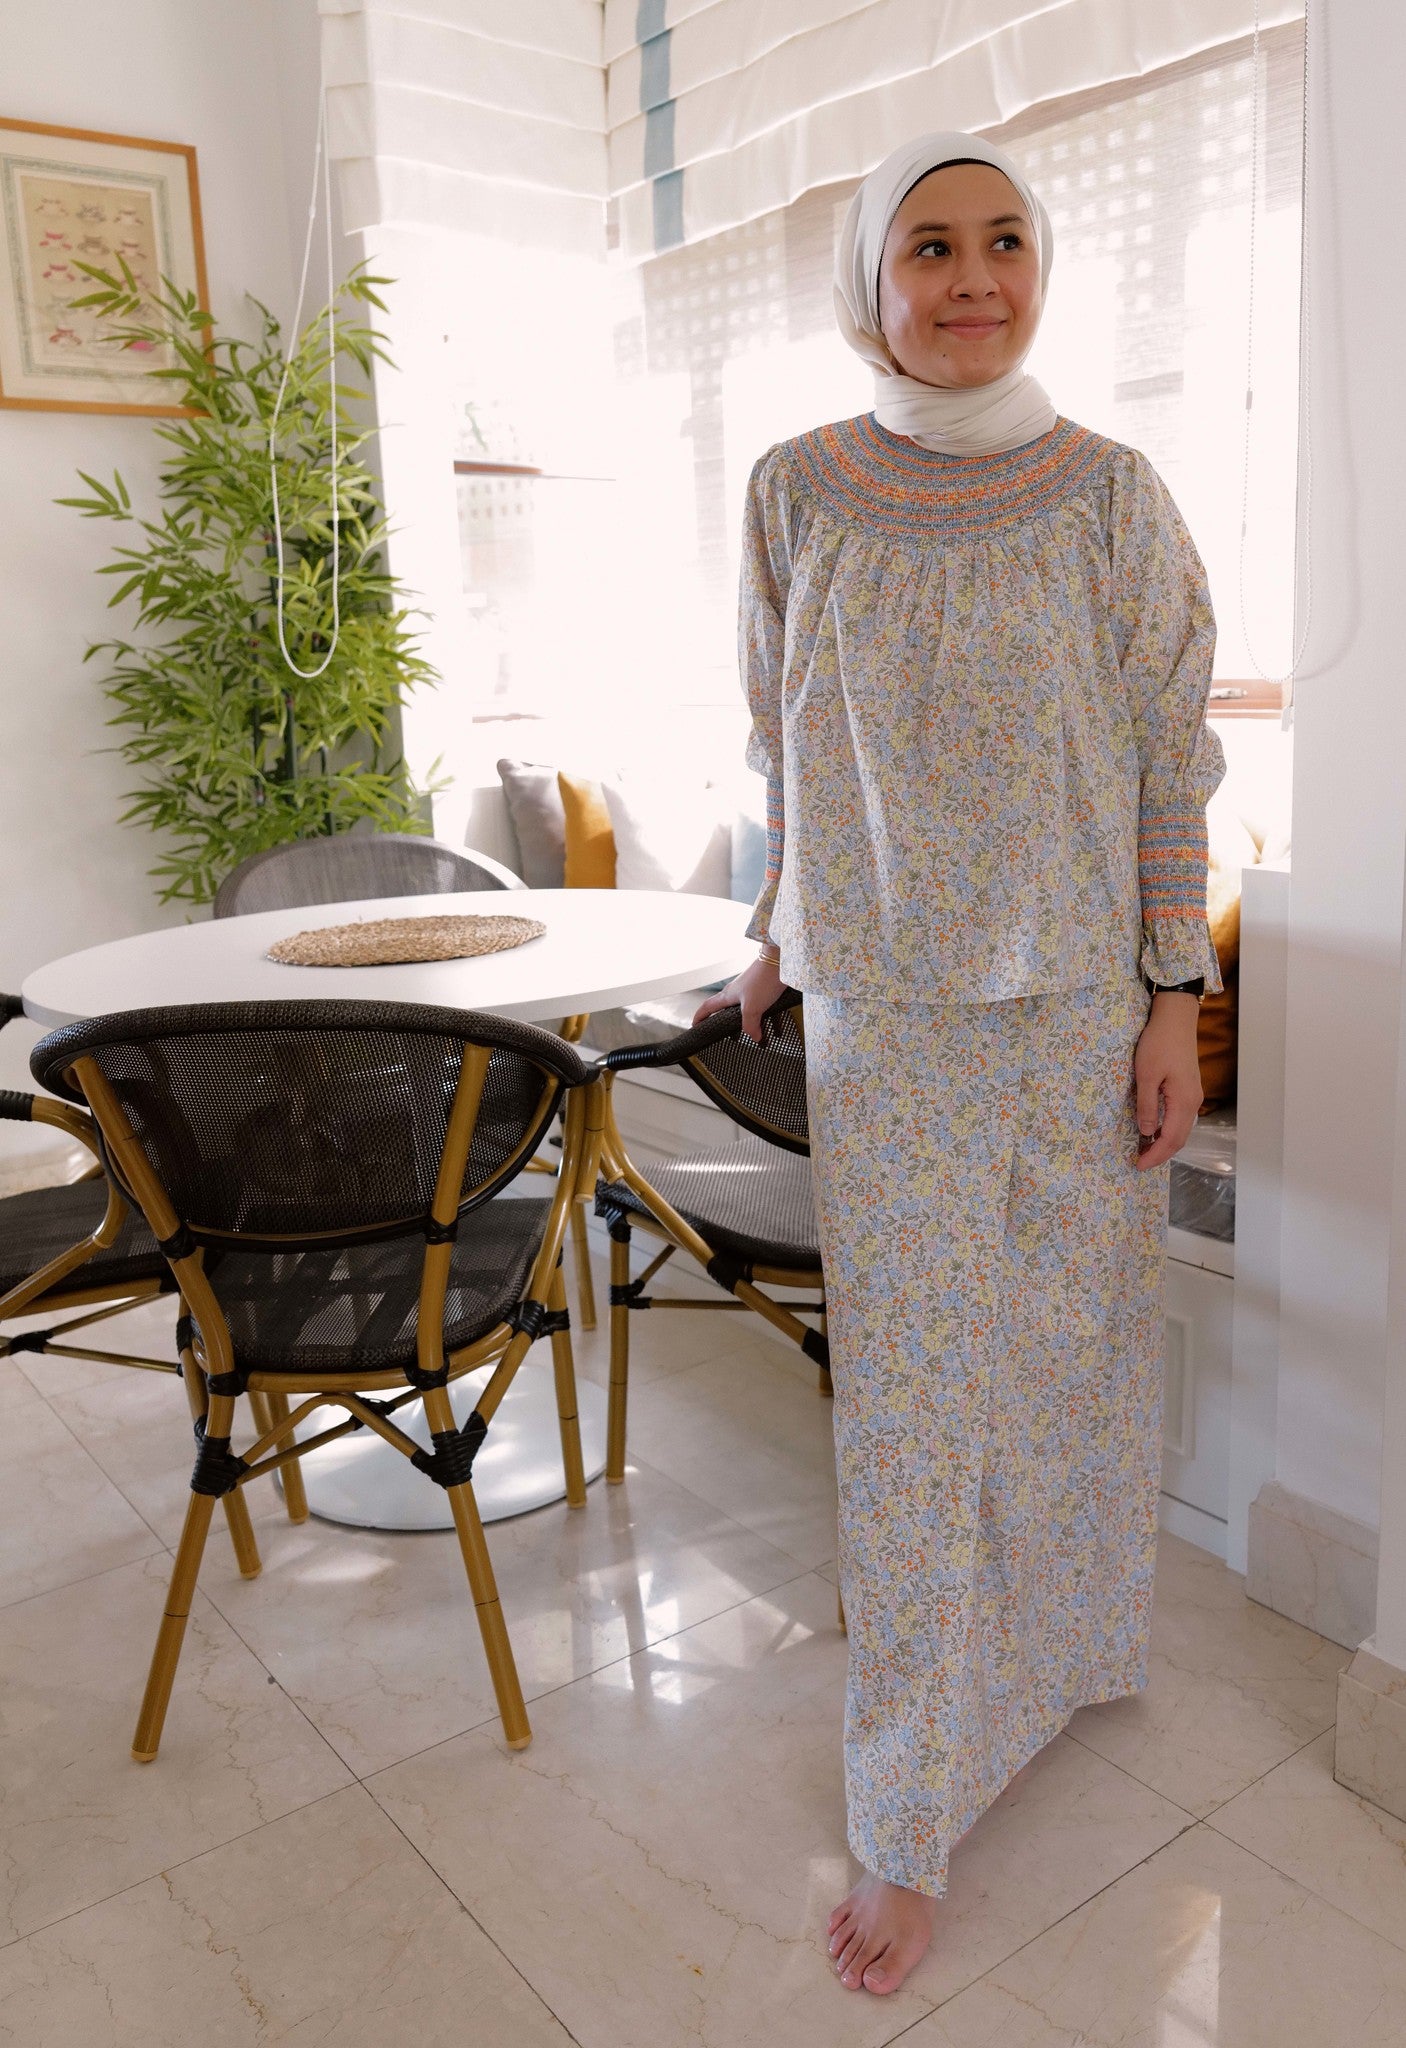 Woman wearing comfortable and high quality baju kurung by petit moi. posing in her own kitchen